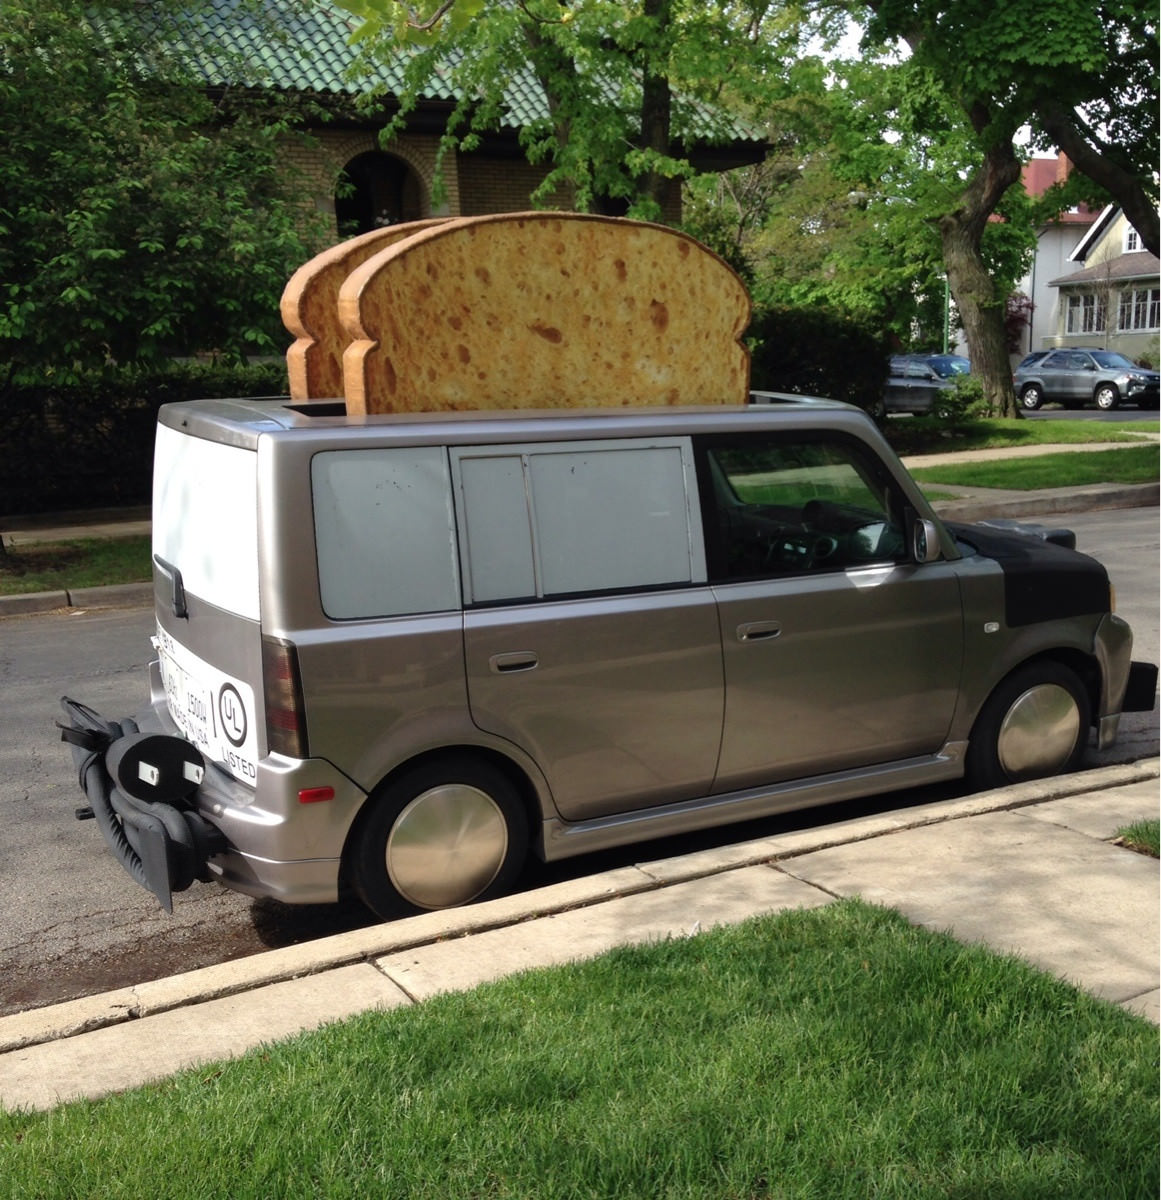 Car that looks like a toaster